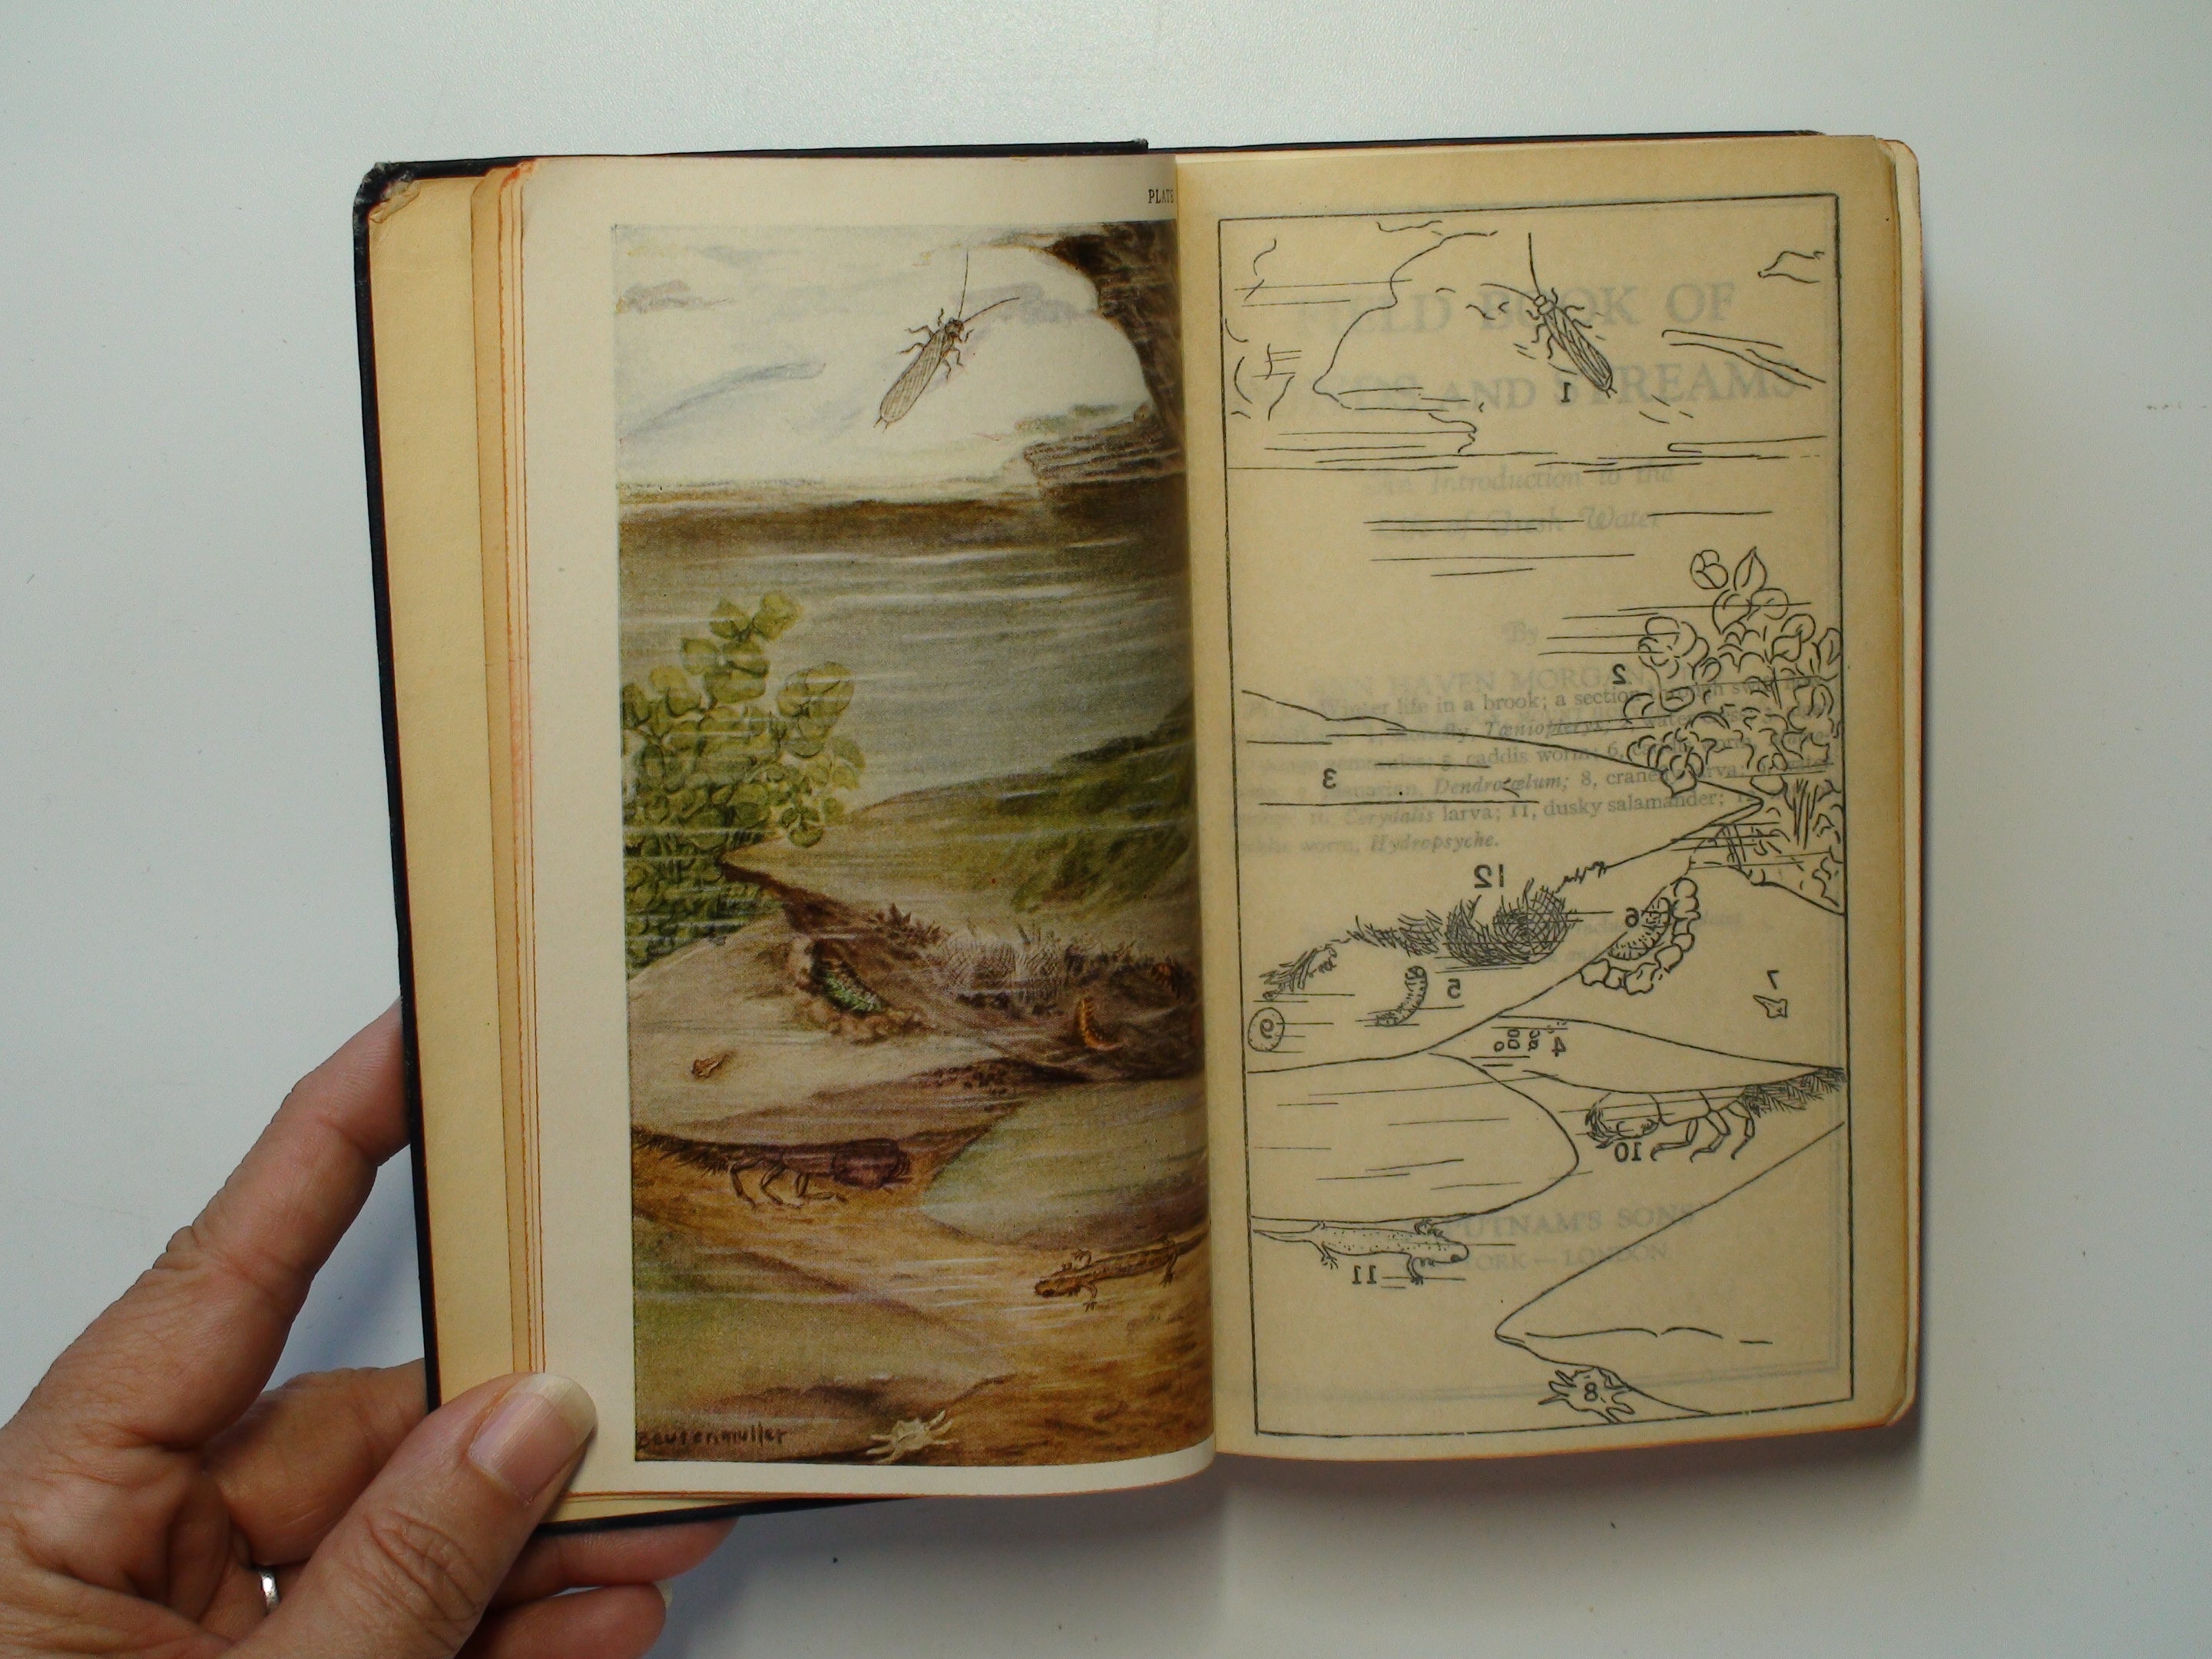 Field Book of Ponds and Streams, Ann Haven Morgan, Illustrated, 4th Ed, 1936